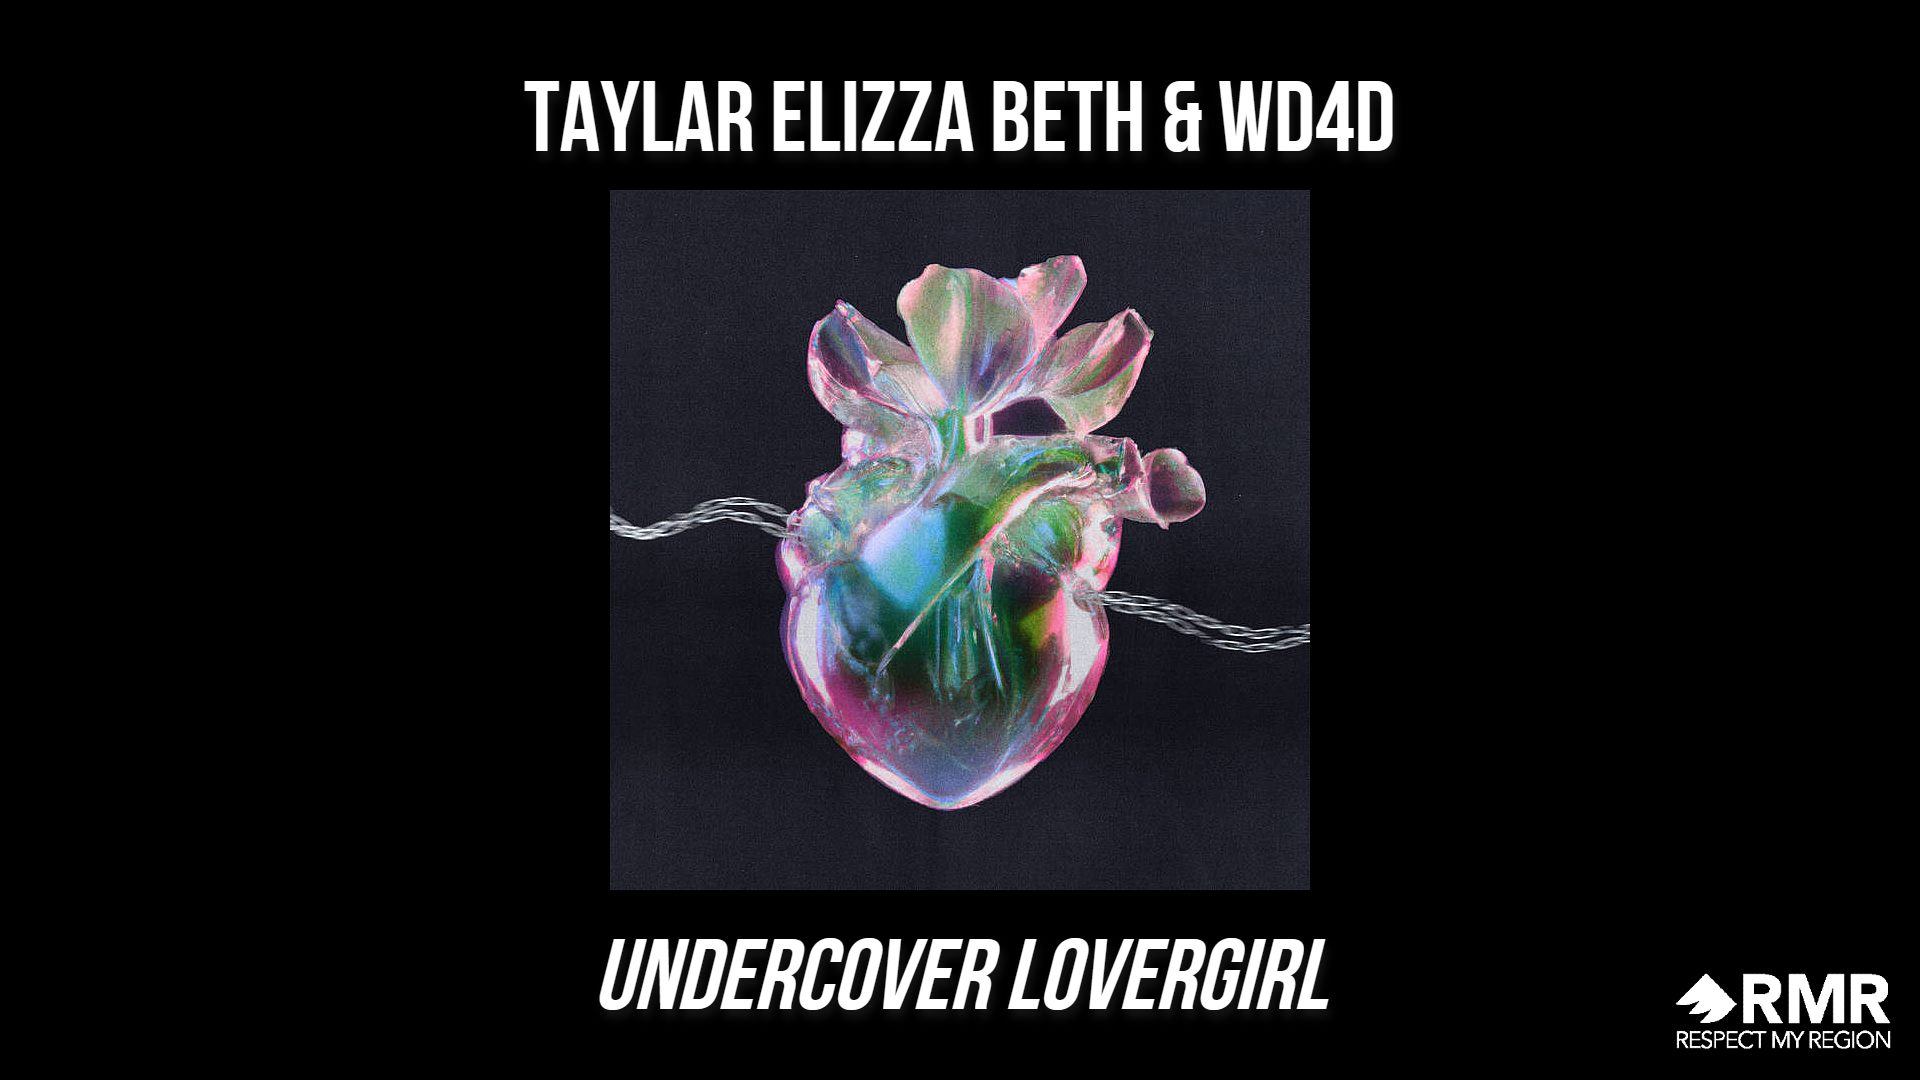 undercover lovergirl taylar elizza beth and wd4d